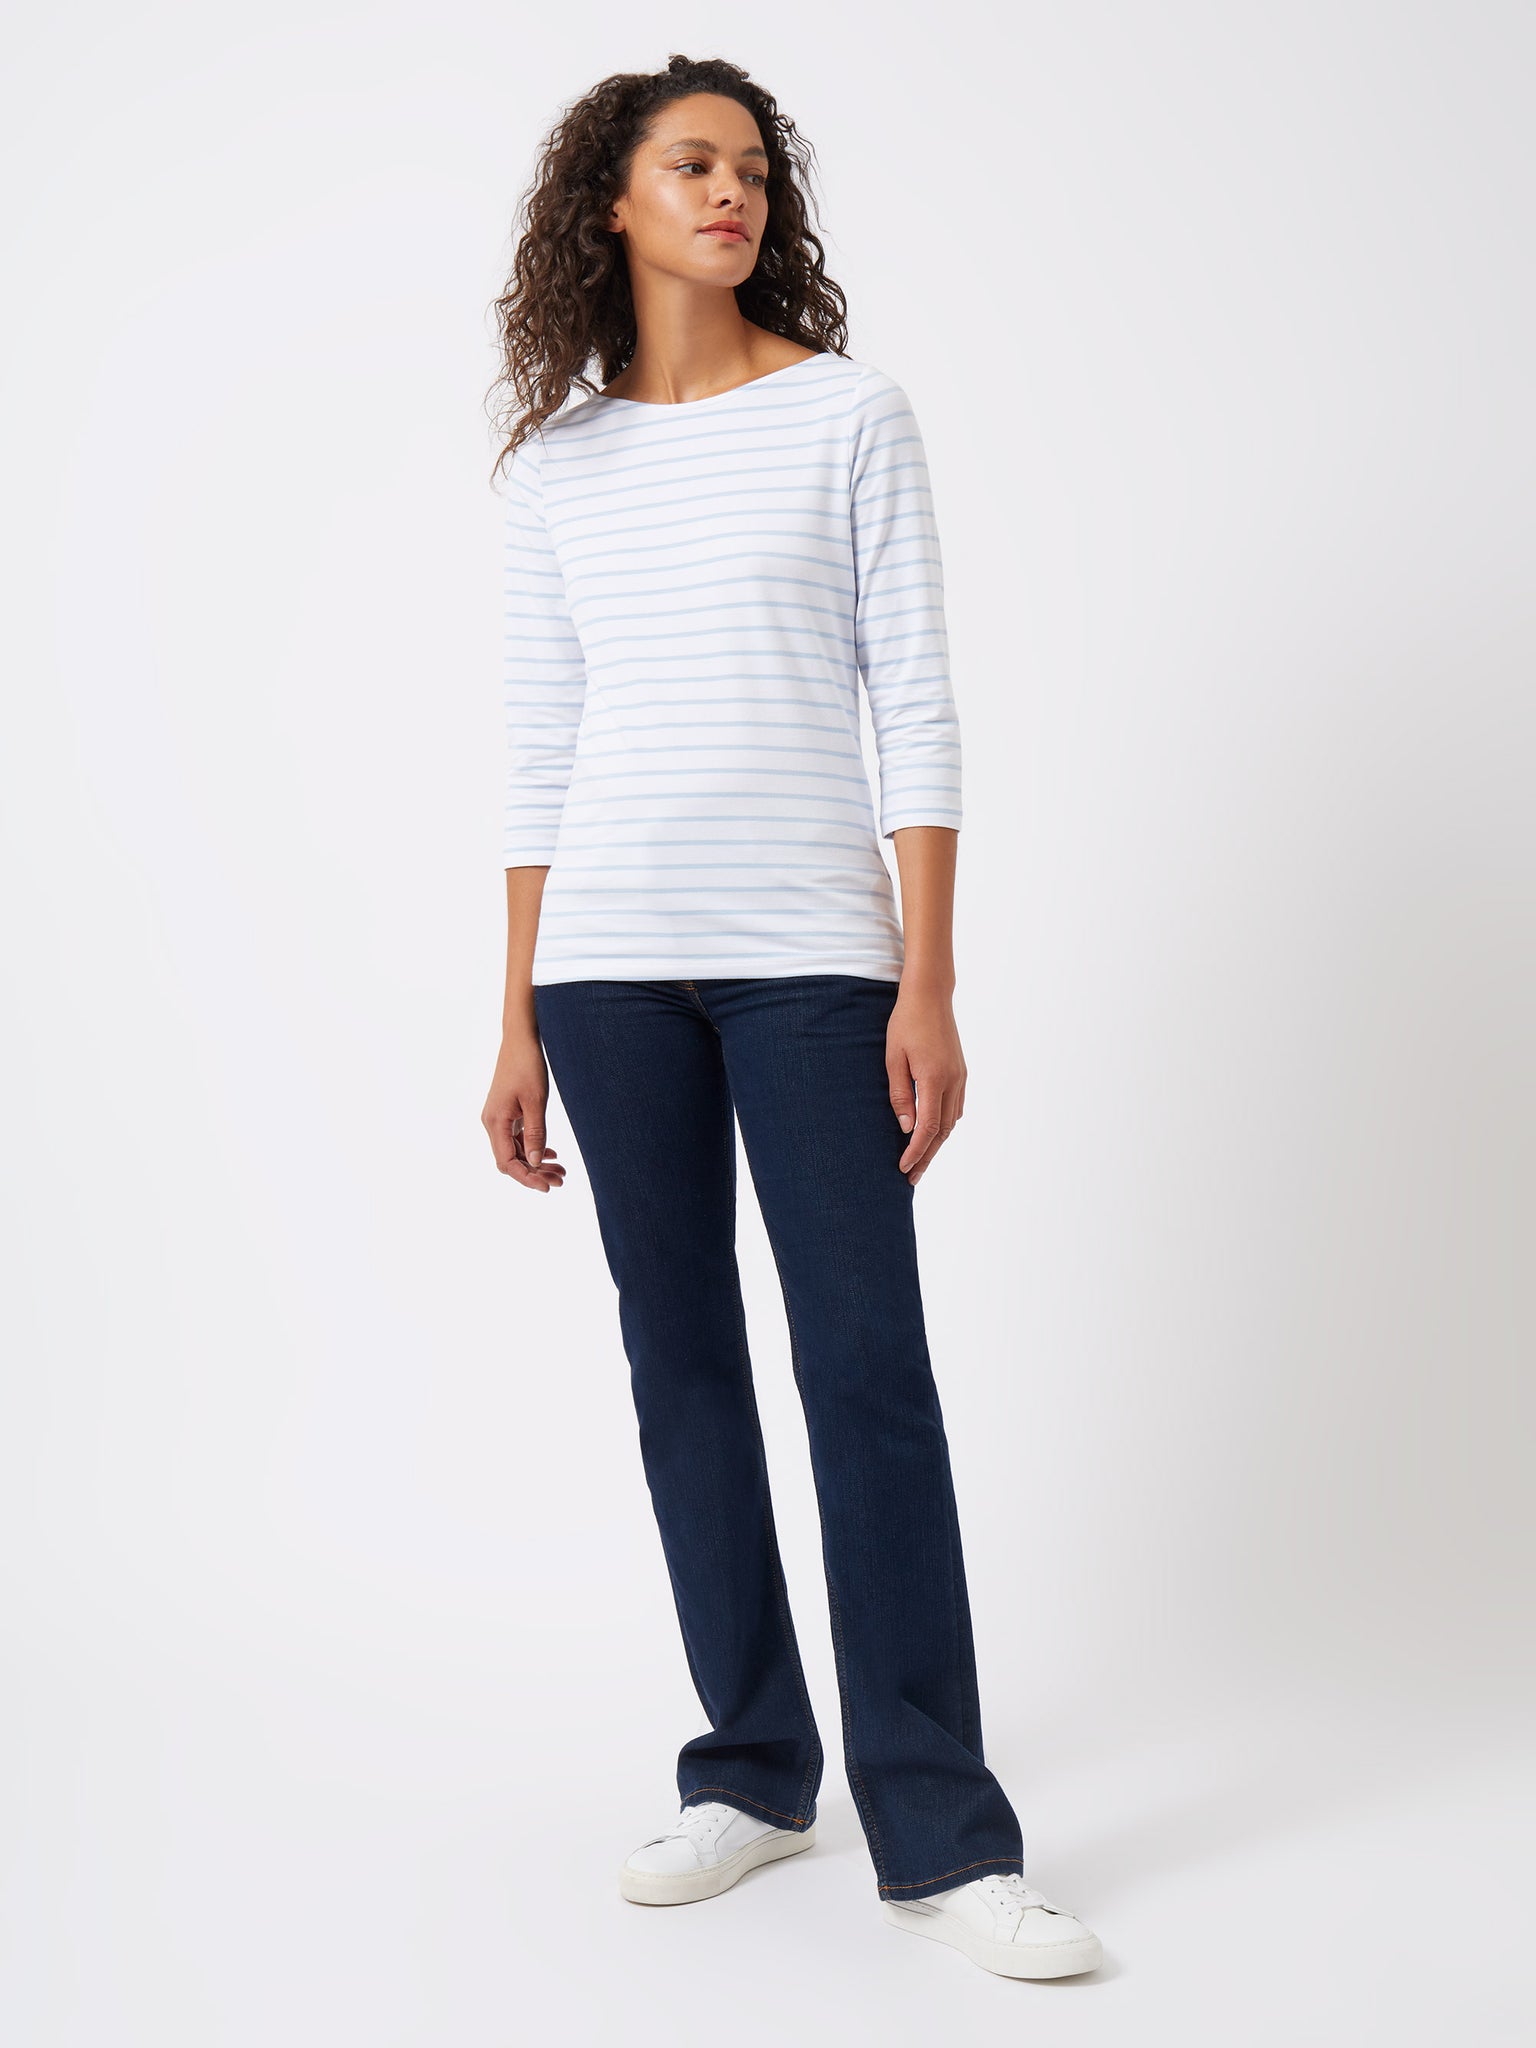 Great Plains 3/4 Sleeve Blue Stripe Top in White